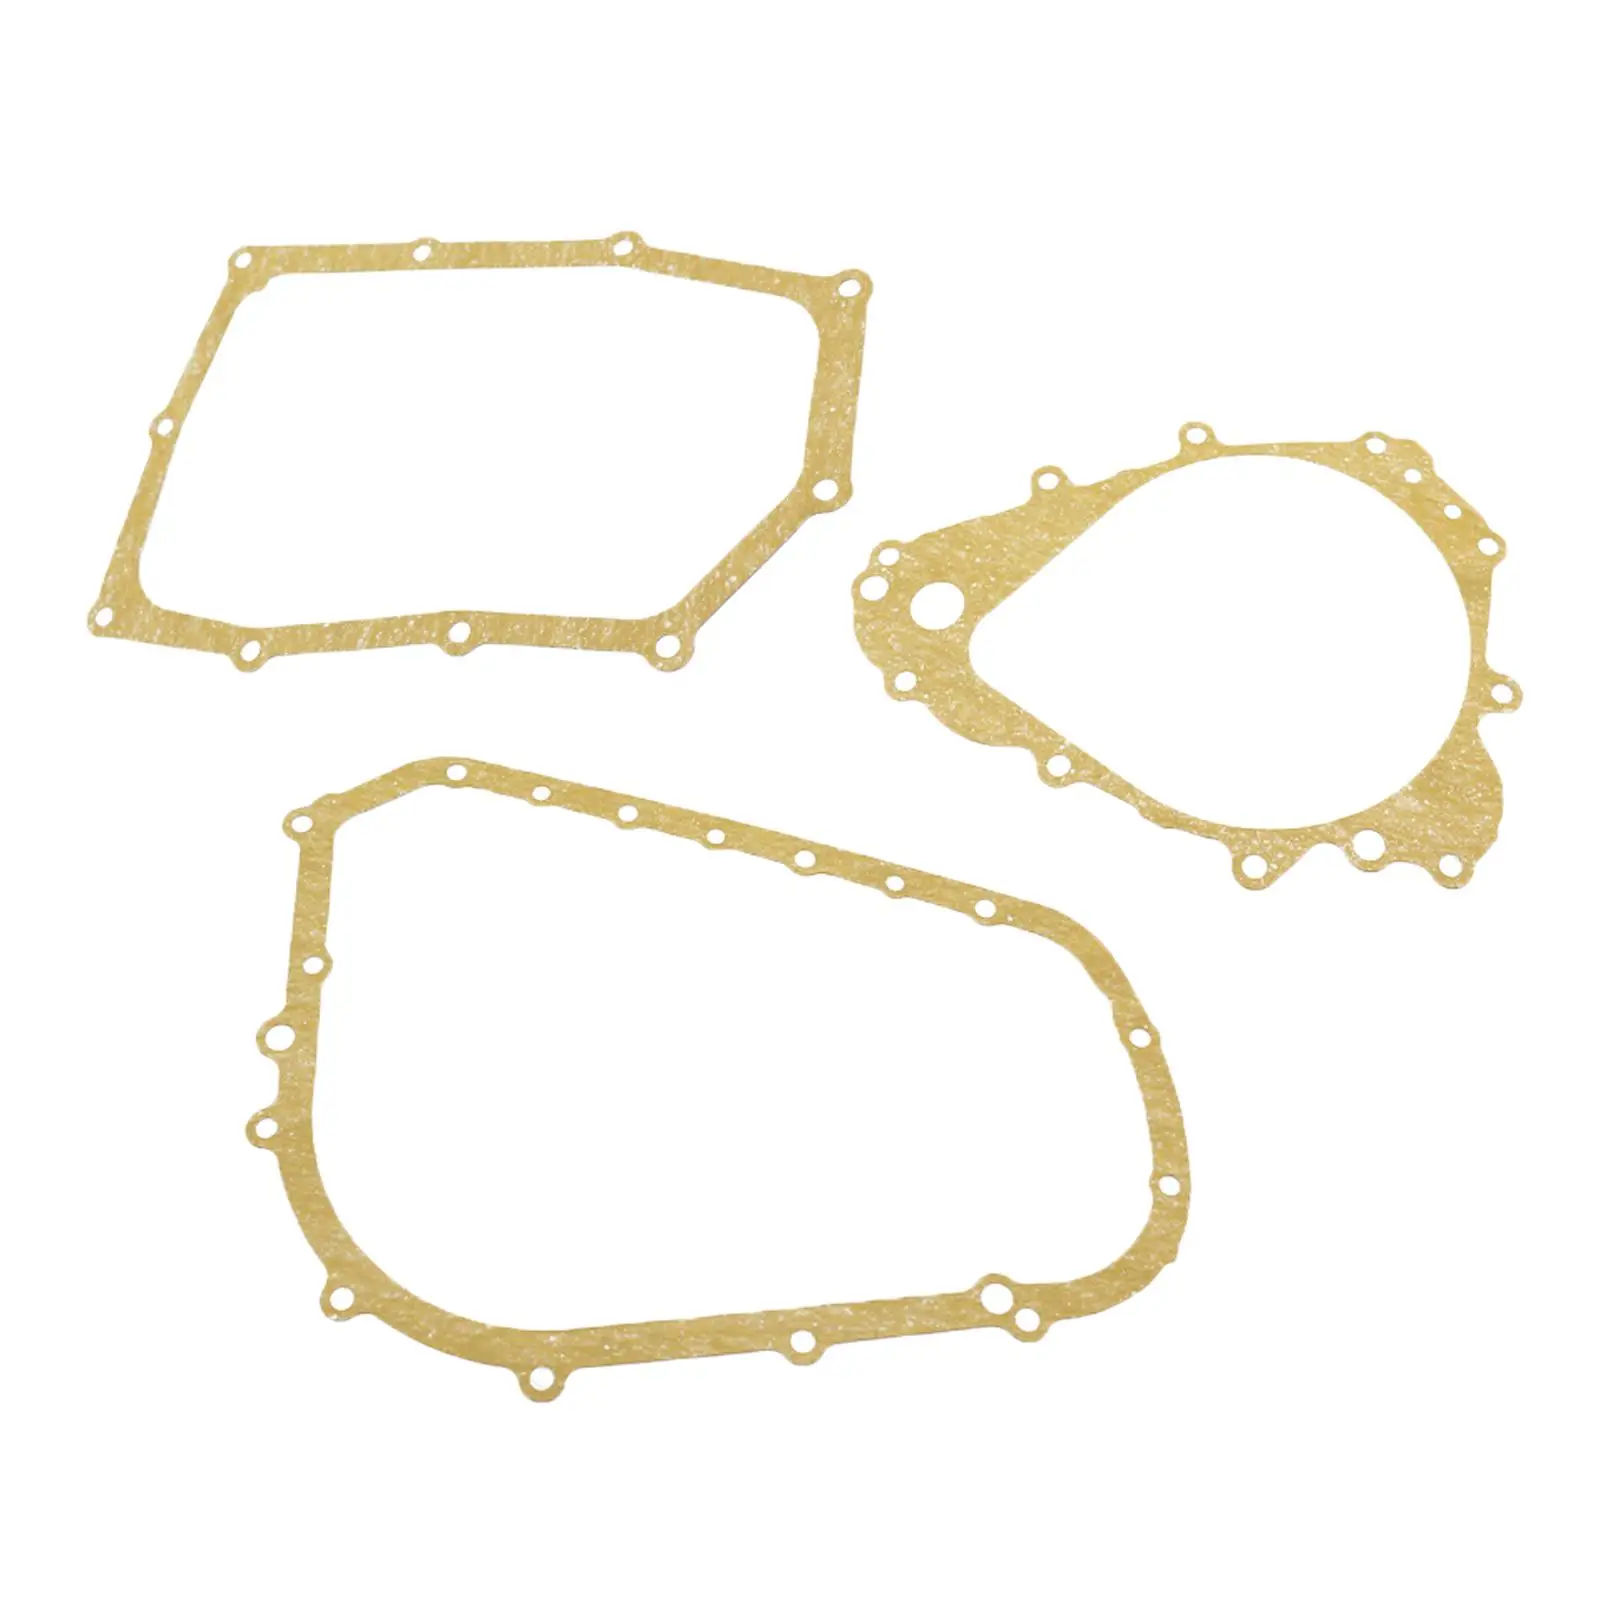 Clutch Oil  Gasket Spare Parts Replaces 018   2012-2018 Durable Easy to Install